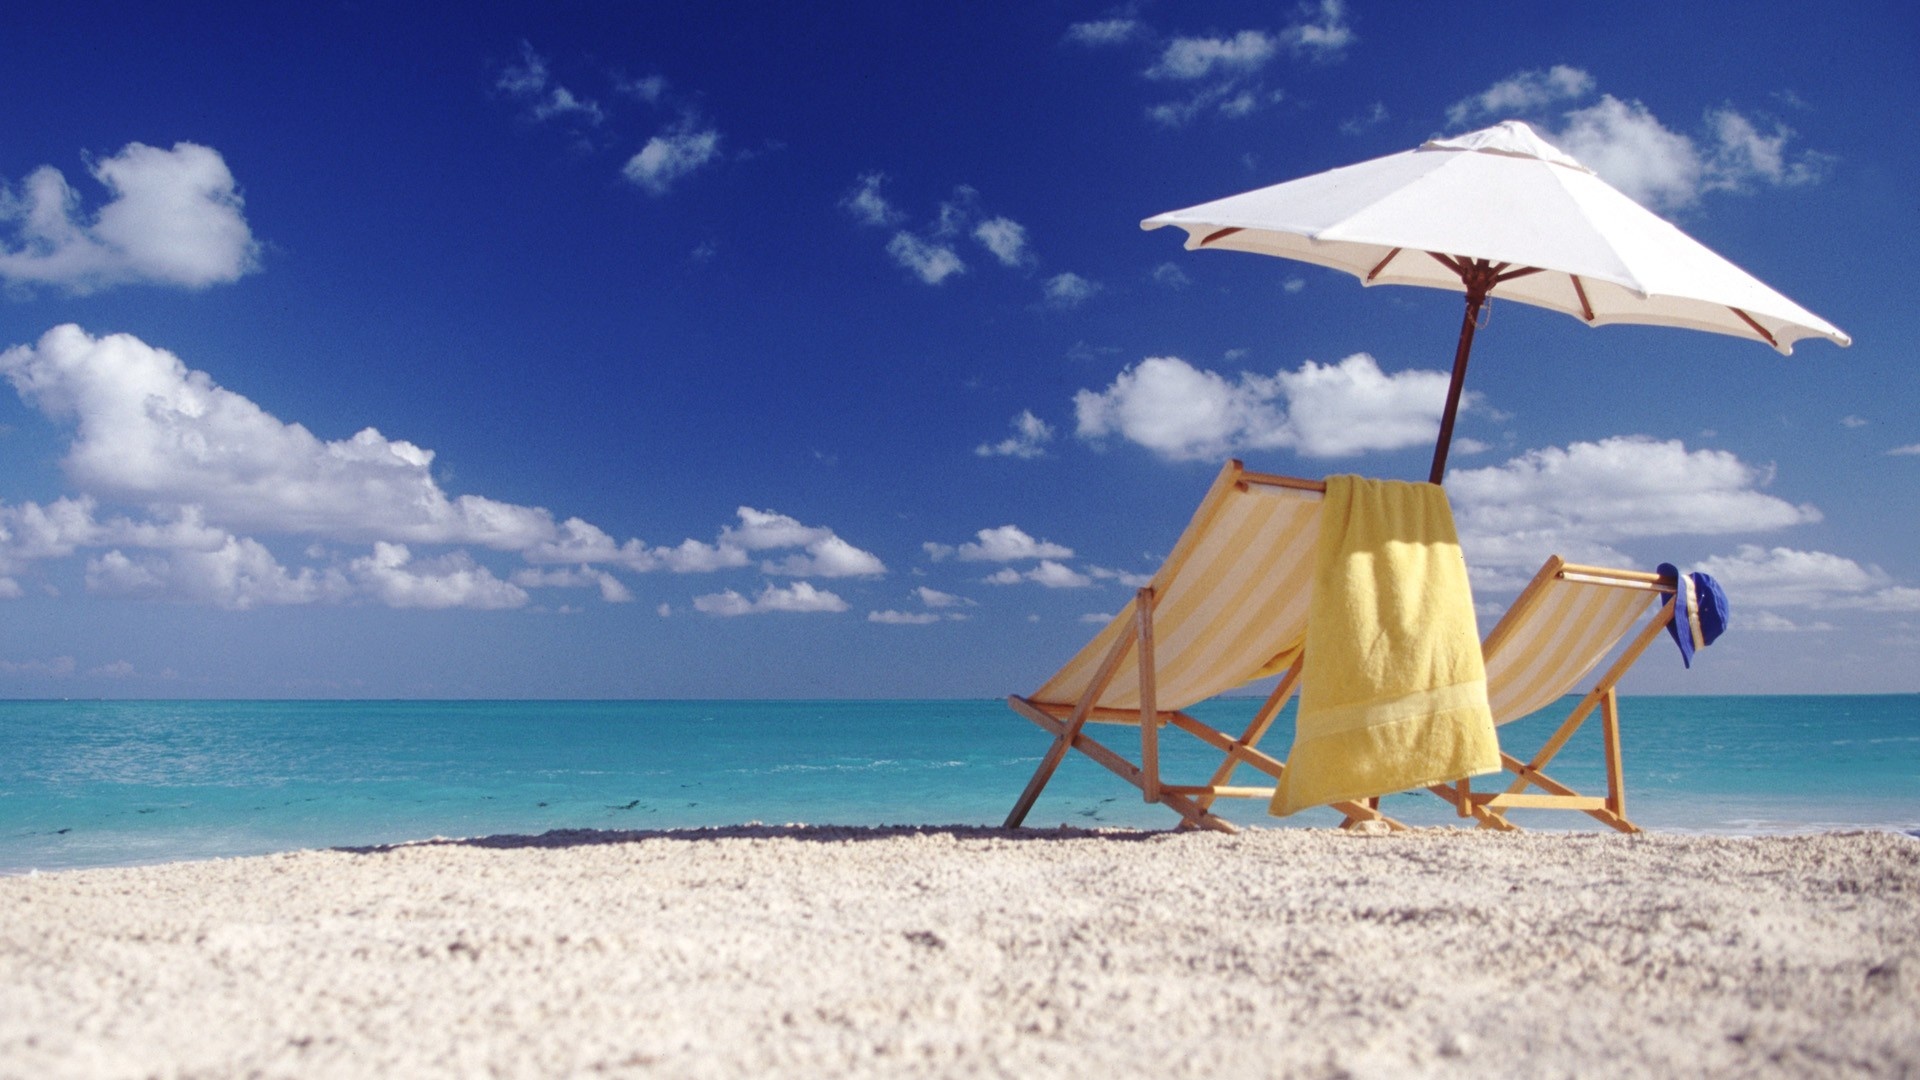 Beach Umbrella: A folding canopy supported by wooden or metal ribs. 1920x1080 Full HD Wallpaper.